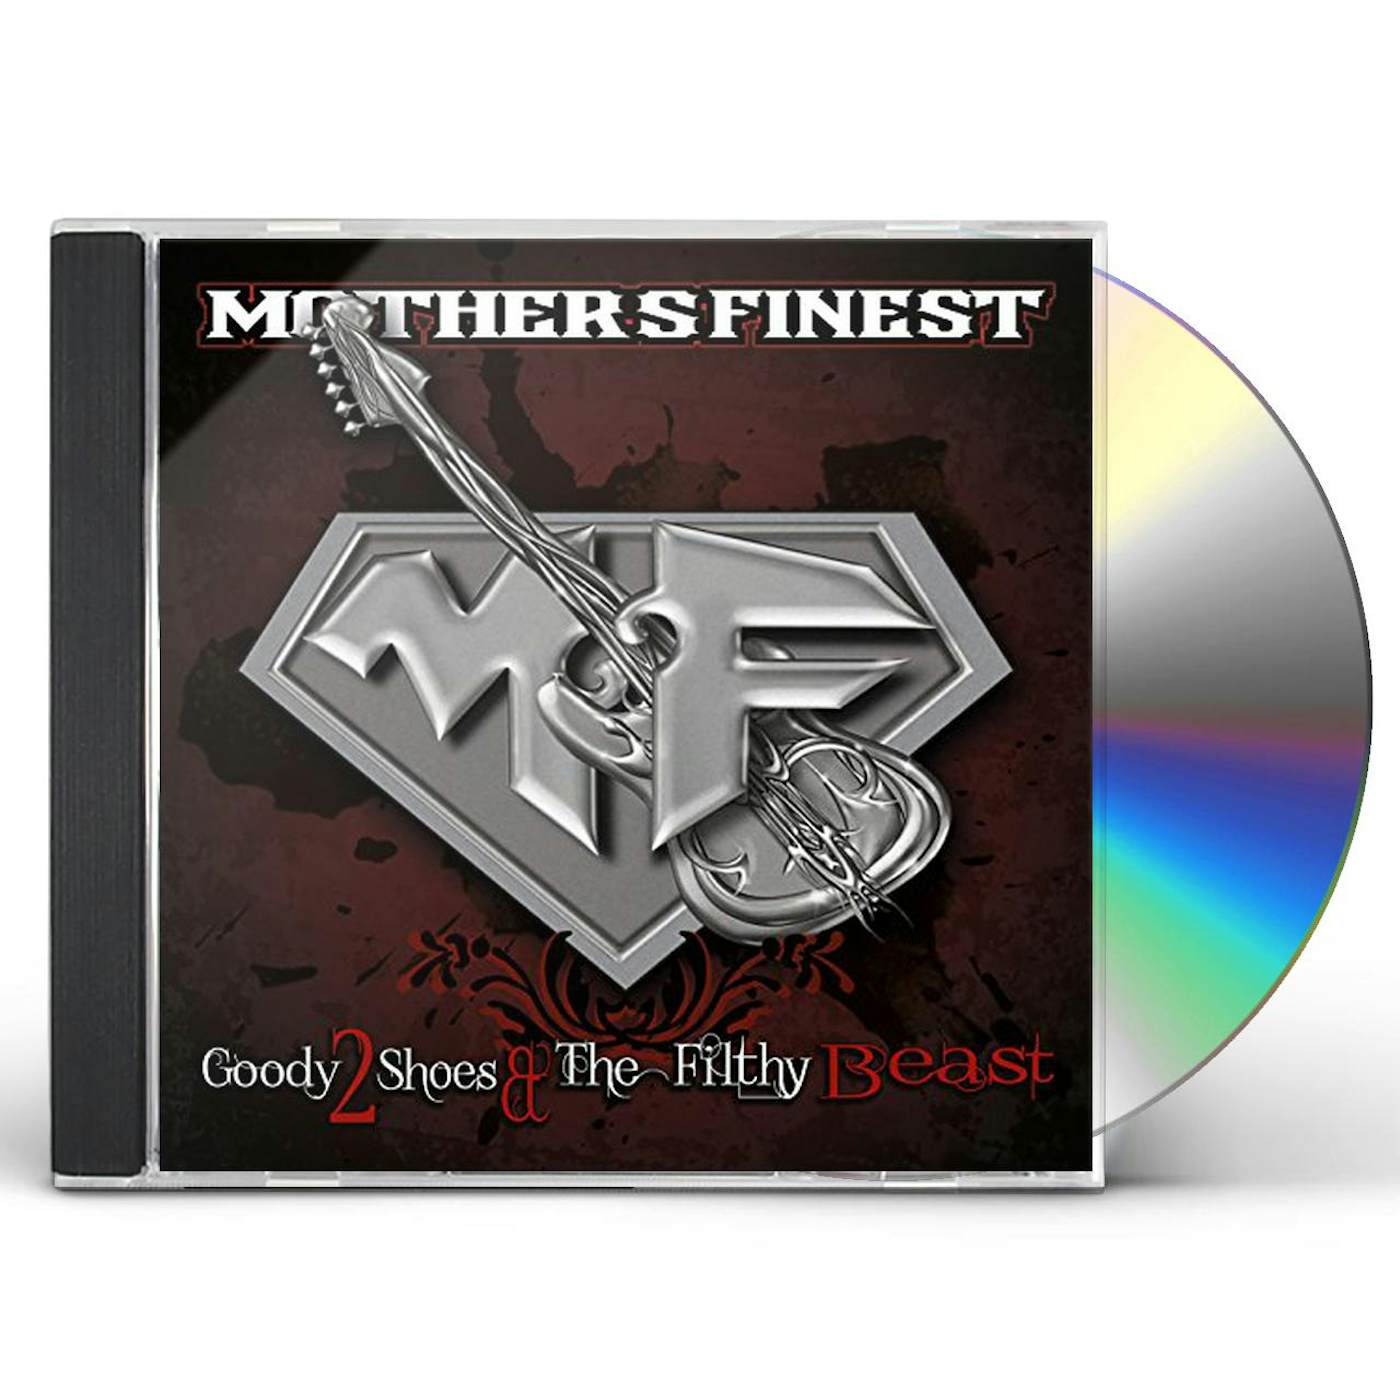 Mother's Finest GOODY 2 SHOES & THE FILTHY BEAST CD